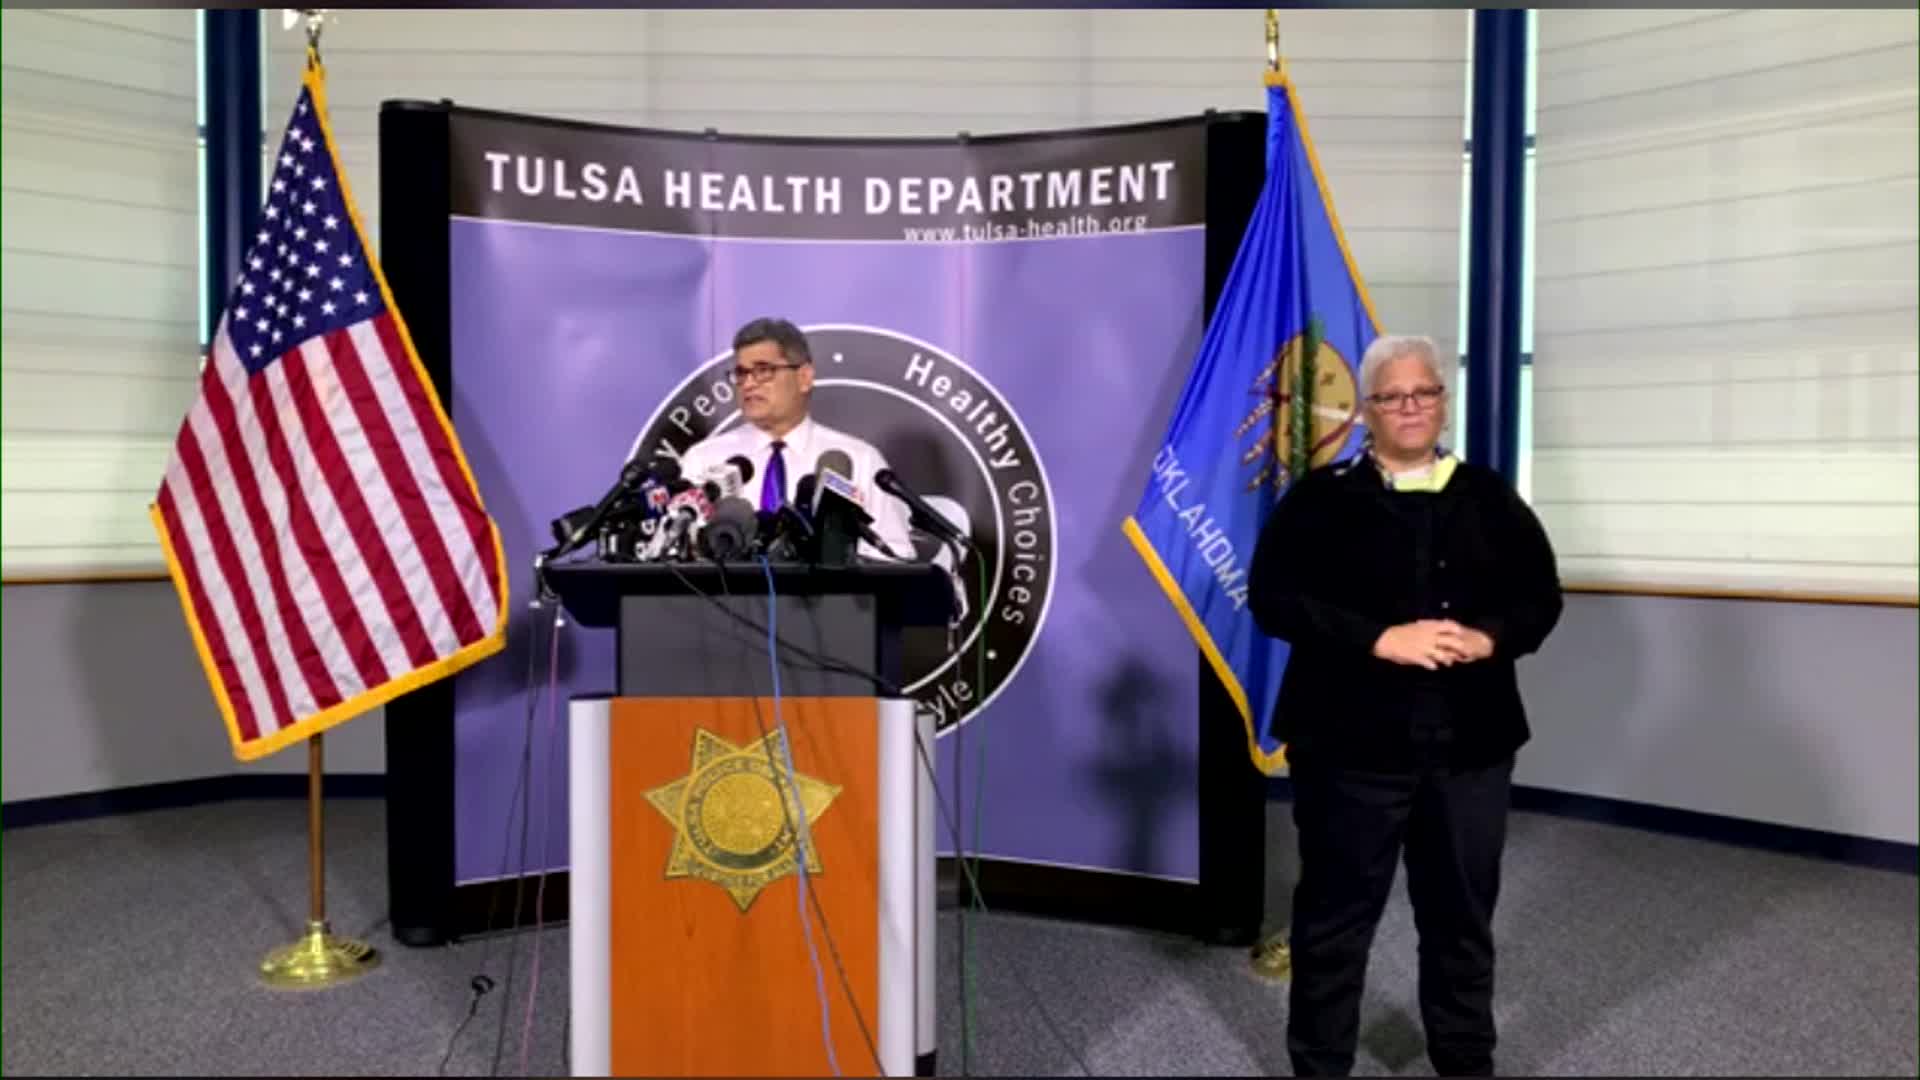 Director of the Tulsa Health Department Dr. Bruce Dart speaks at a news presser.